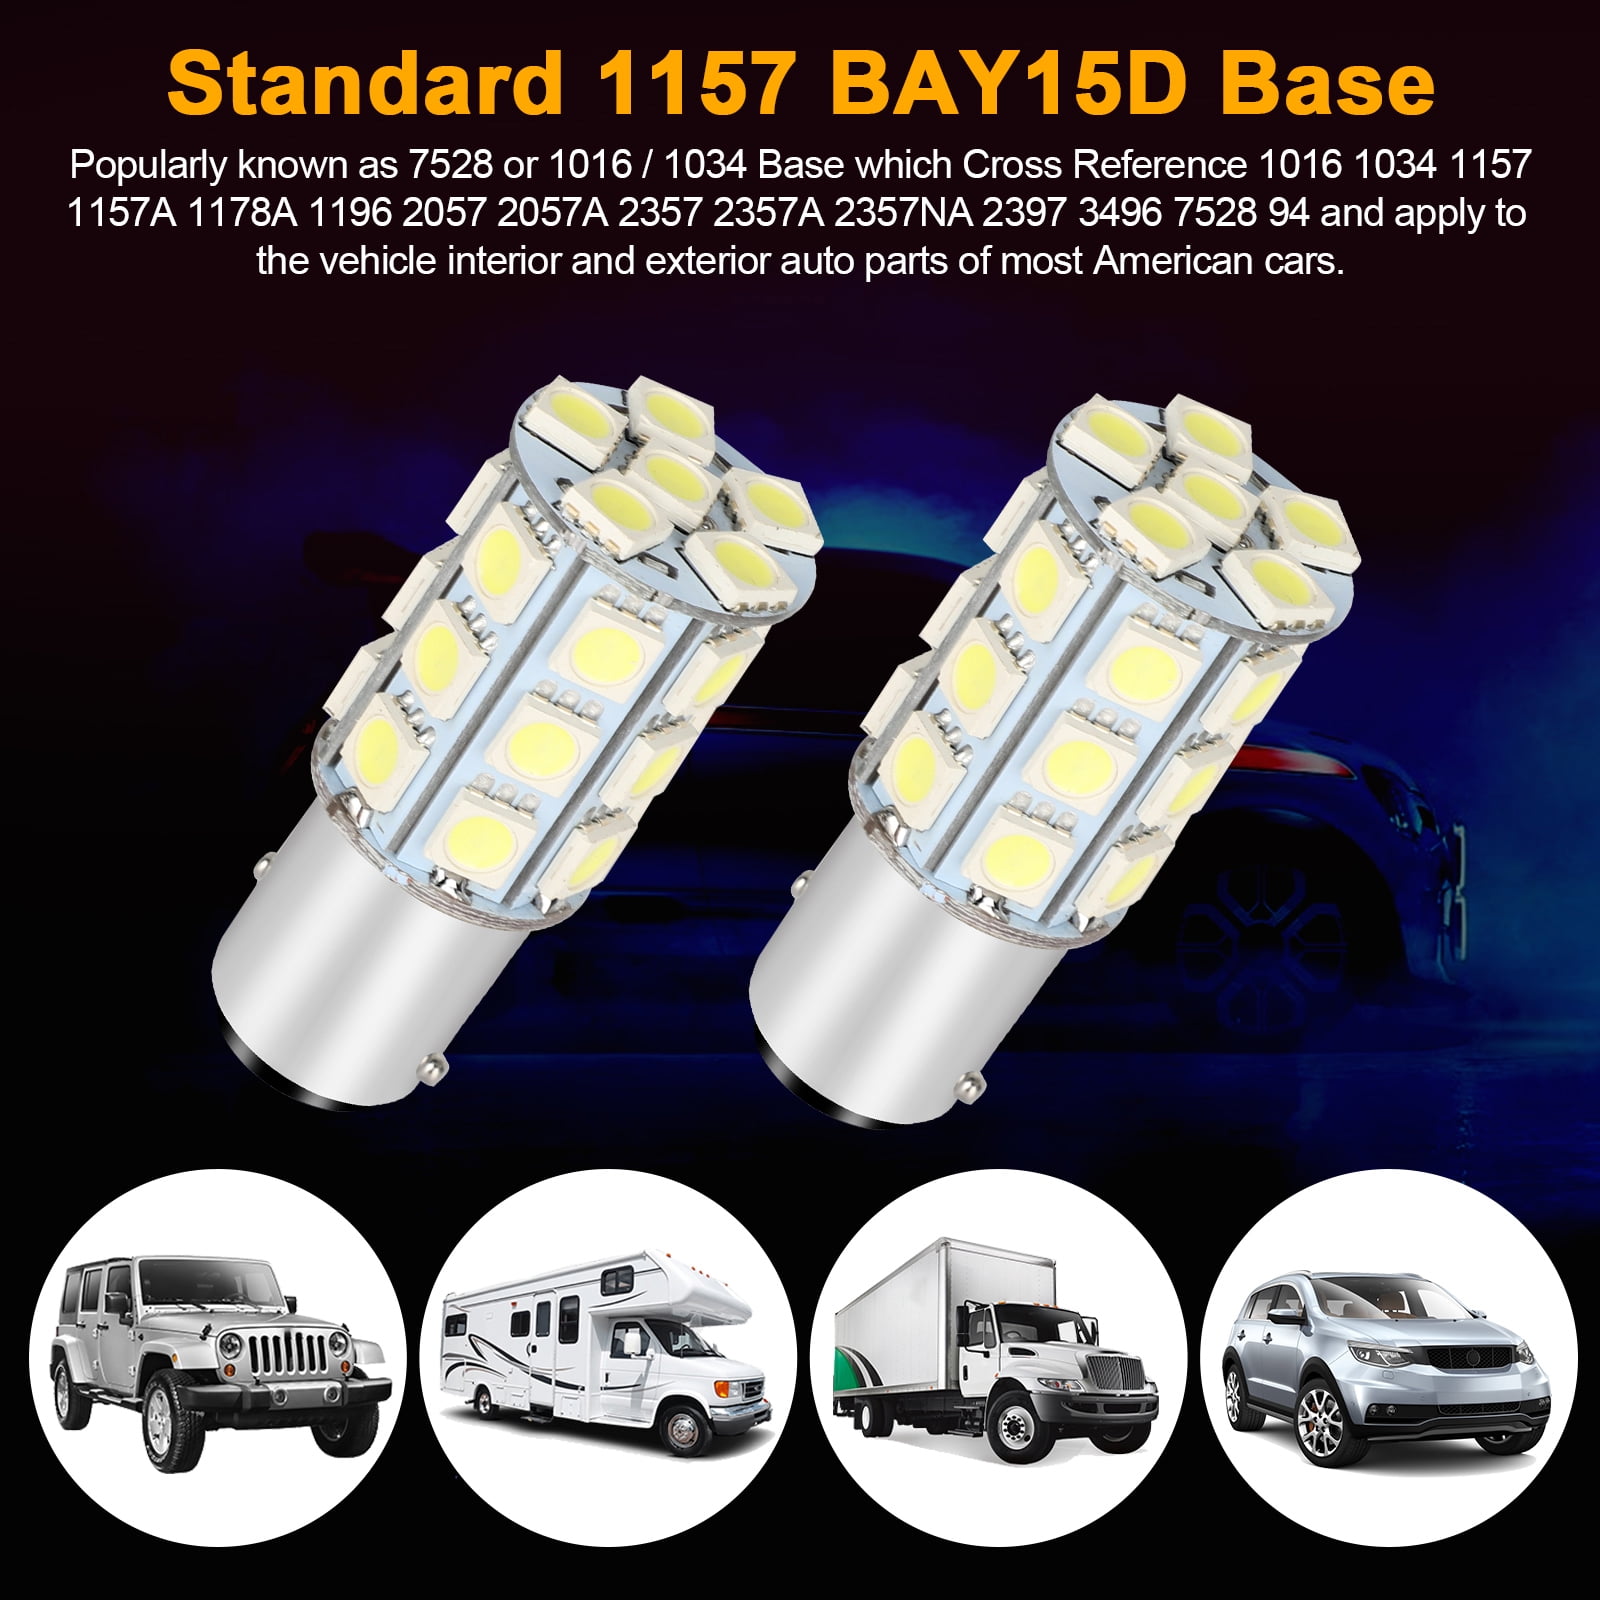 Viesyled 2 Pack 1157 LED Brake Lights Bulb White 2057 7528 15-3030SMD 10-30 V Back Up Reverse Rear Tail Light Bulbs Extremely Bright Replacement 12 month Warranty 